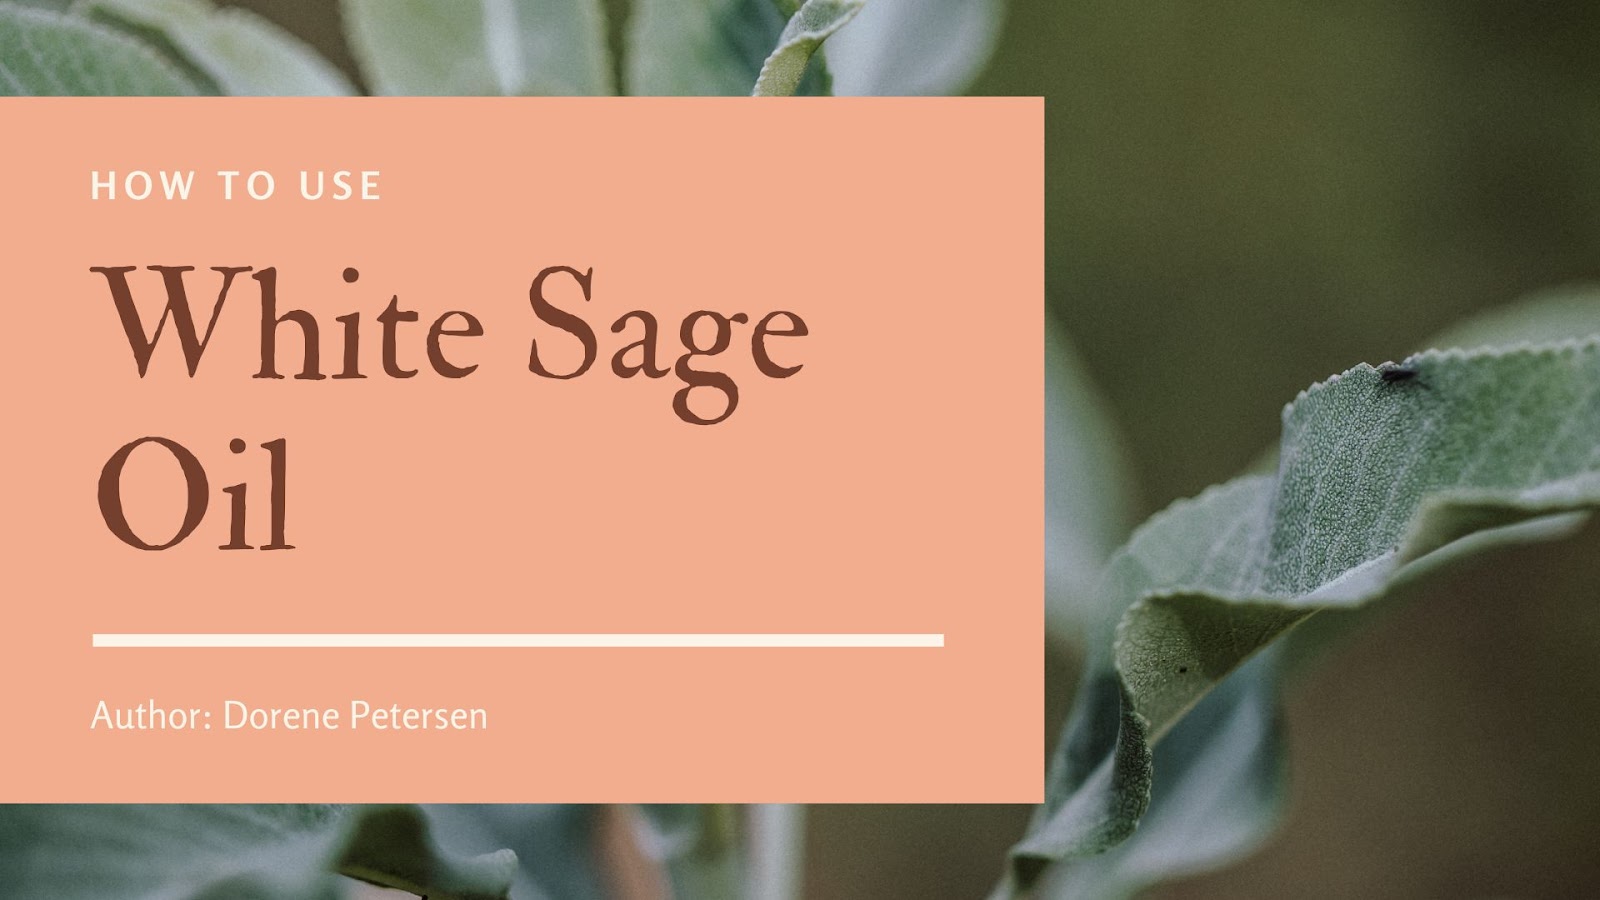 How to use White Sage Oil